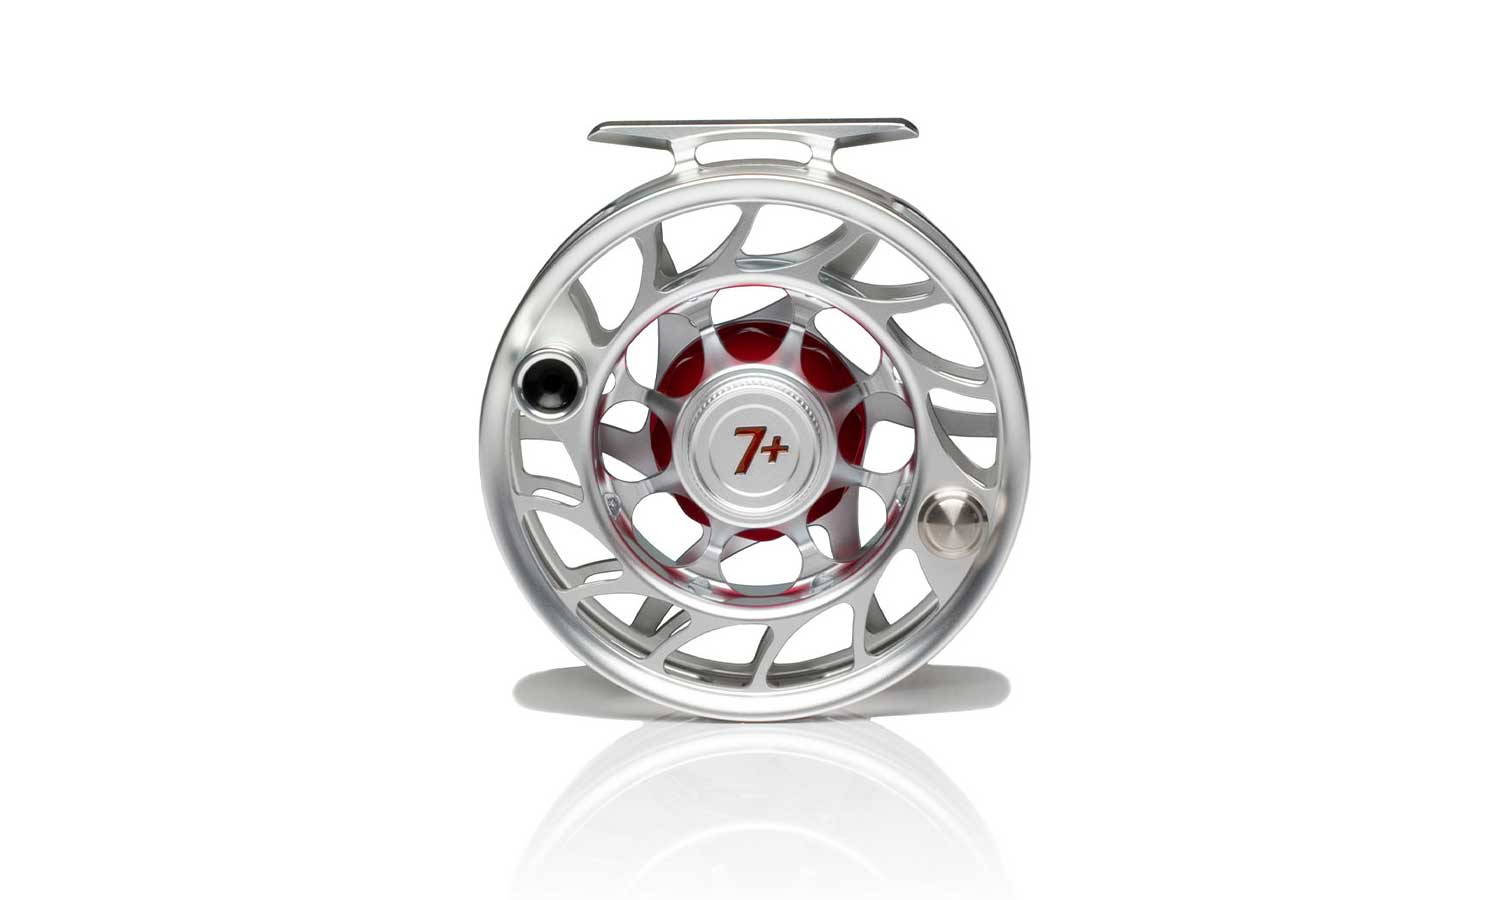 Hatch Iconic 7 Plus Fly Reel - Endless Summer